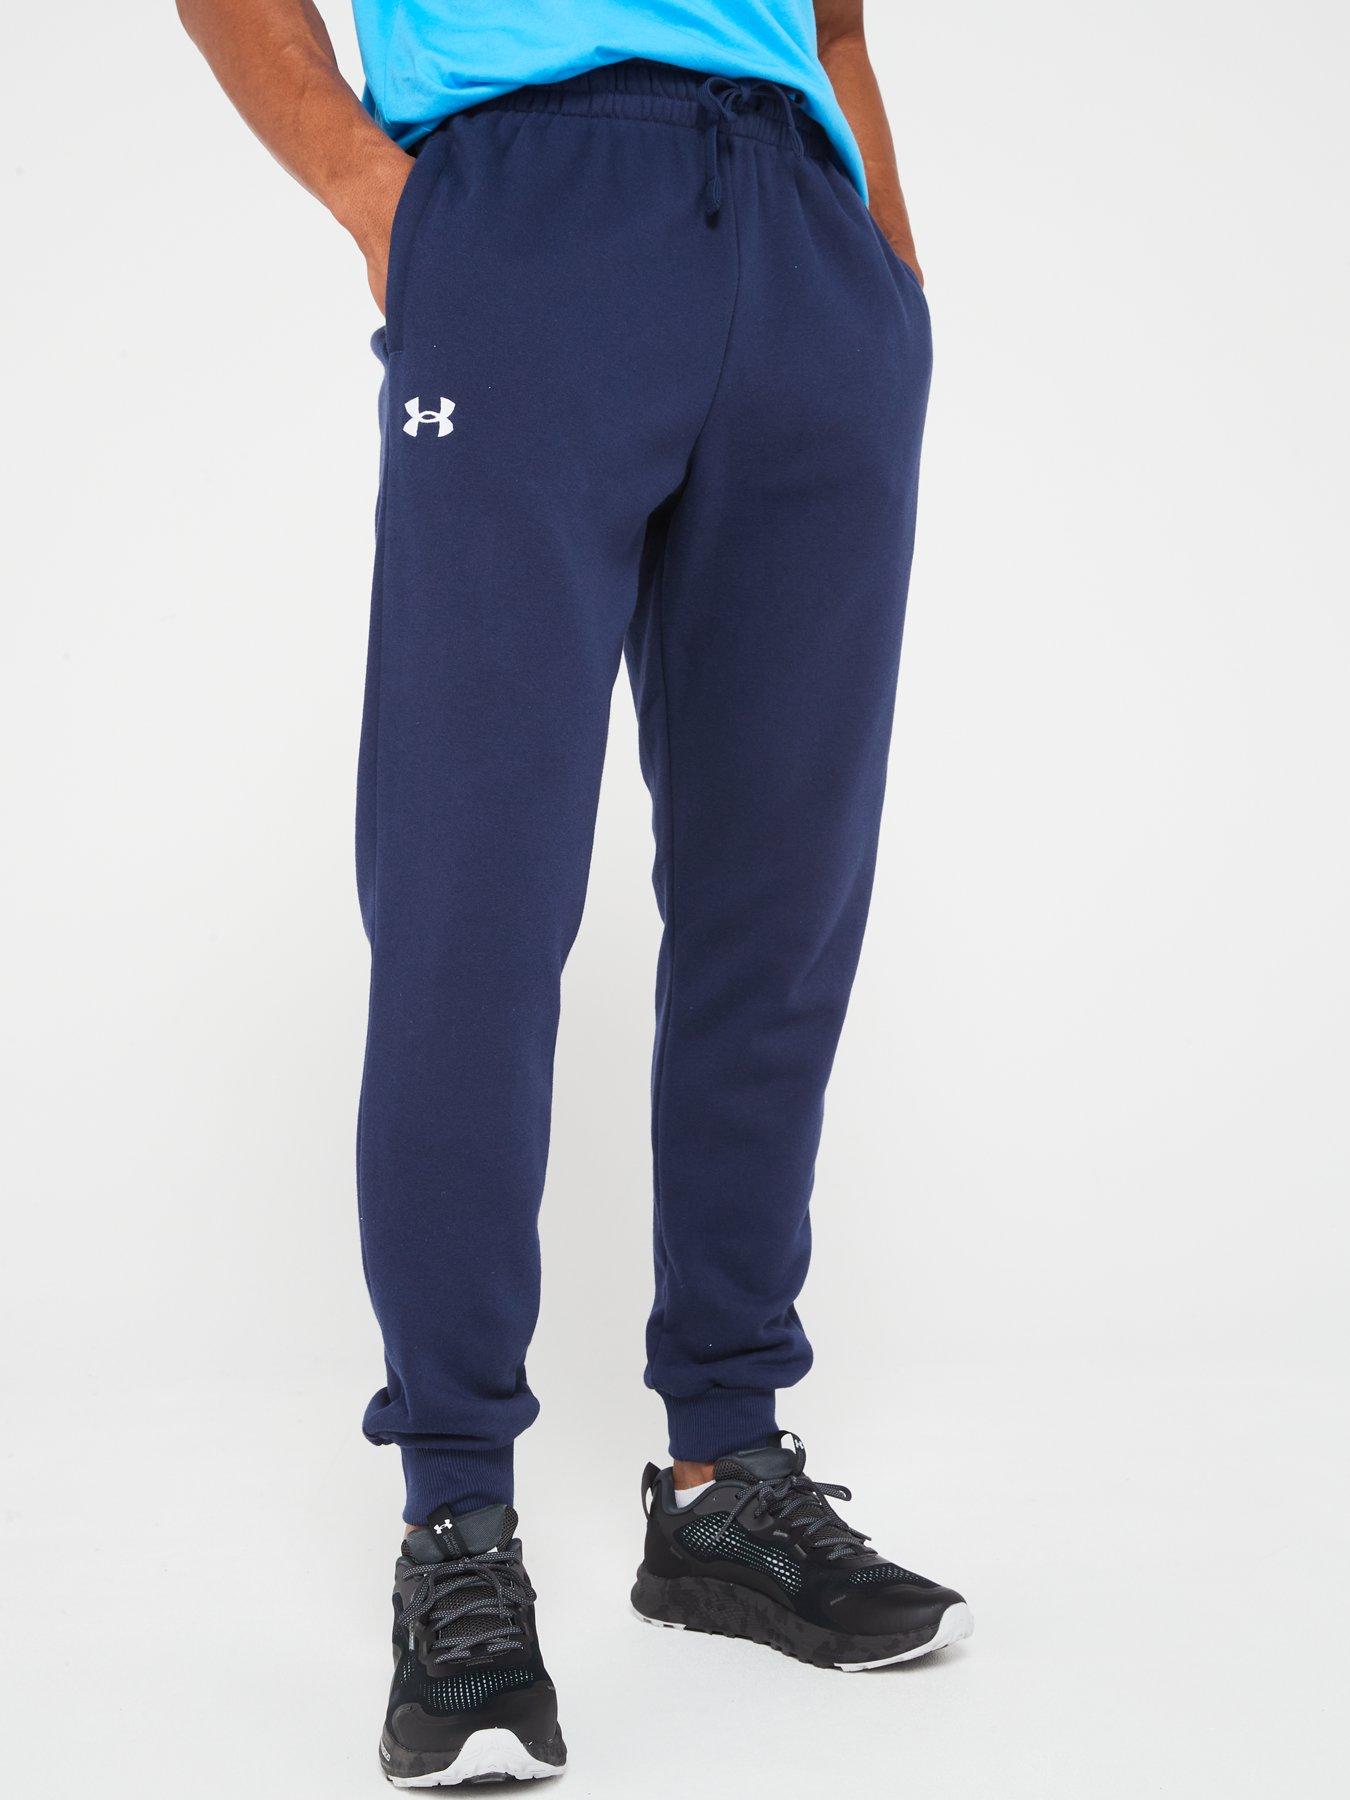 Under Armour Stretch Woven Printed Joggers for Men